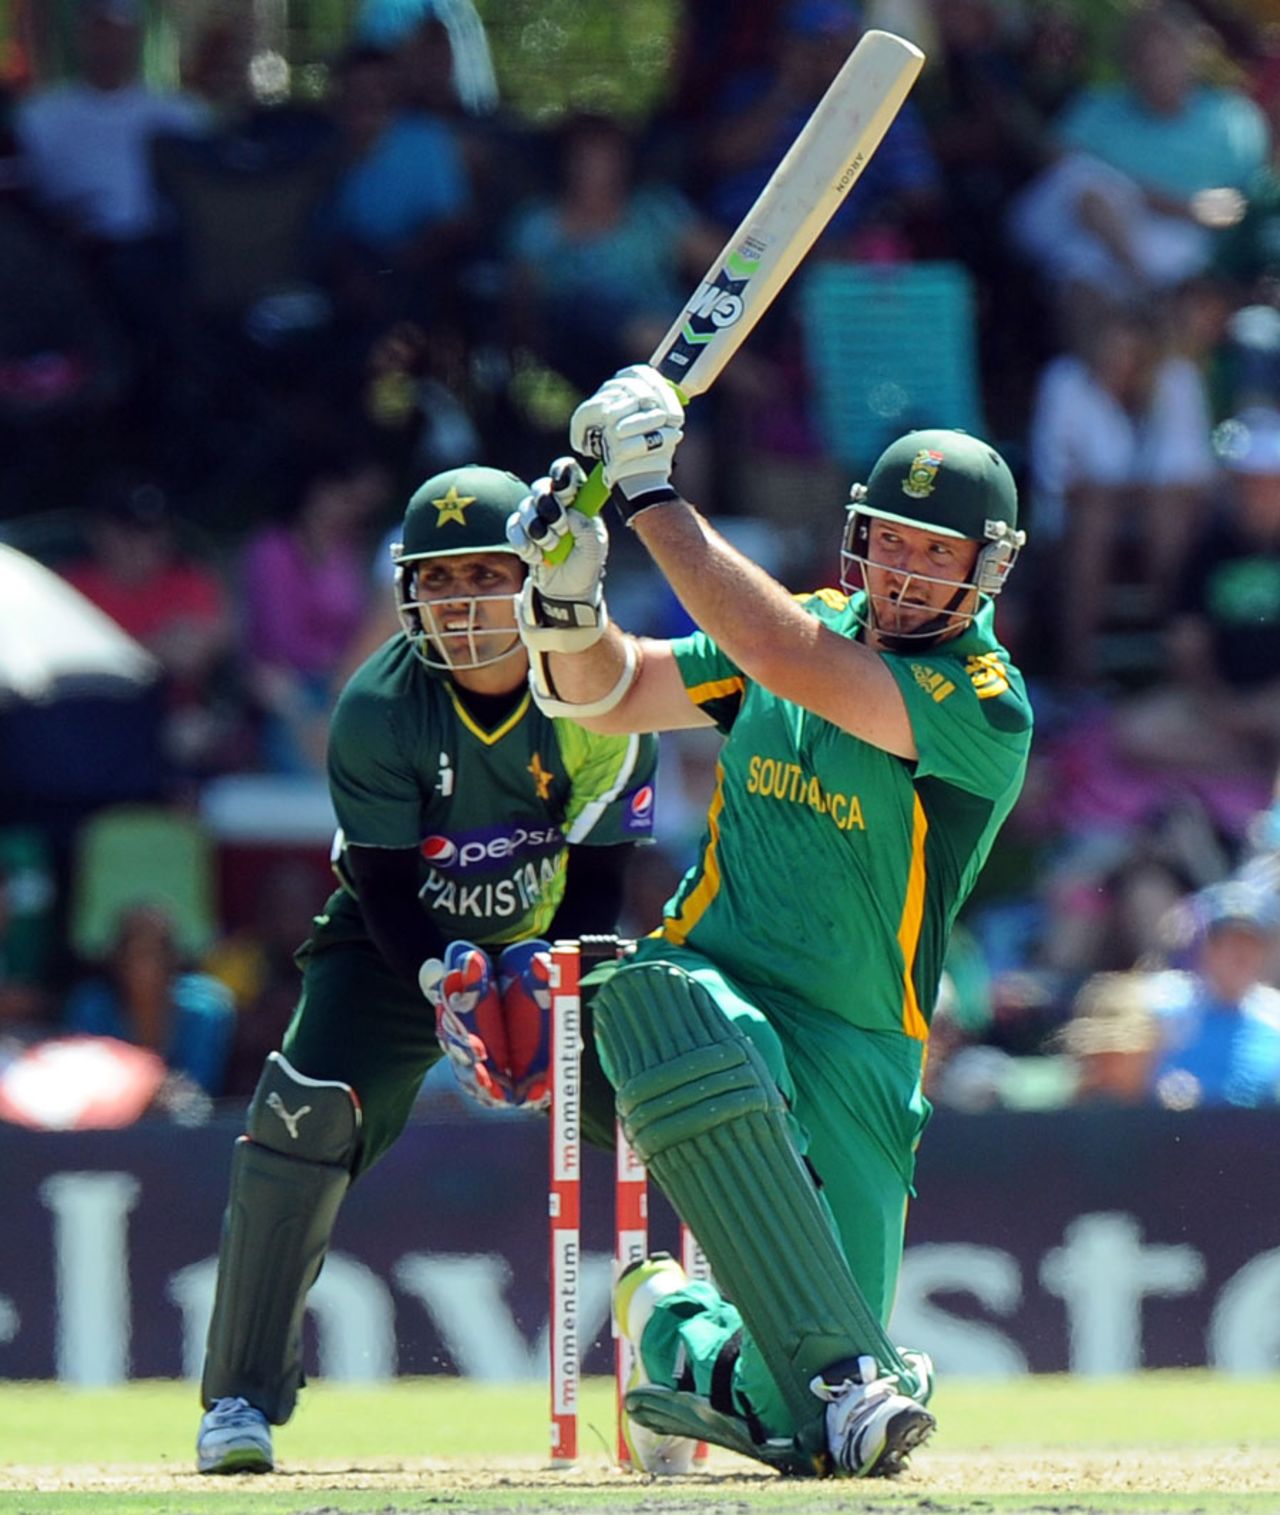 Graeme Smith swats the ball away to the leg side, South Africa v Pakistan, 1st ODI, Bloemfontein, March 10, 2013